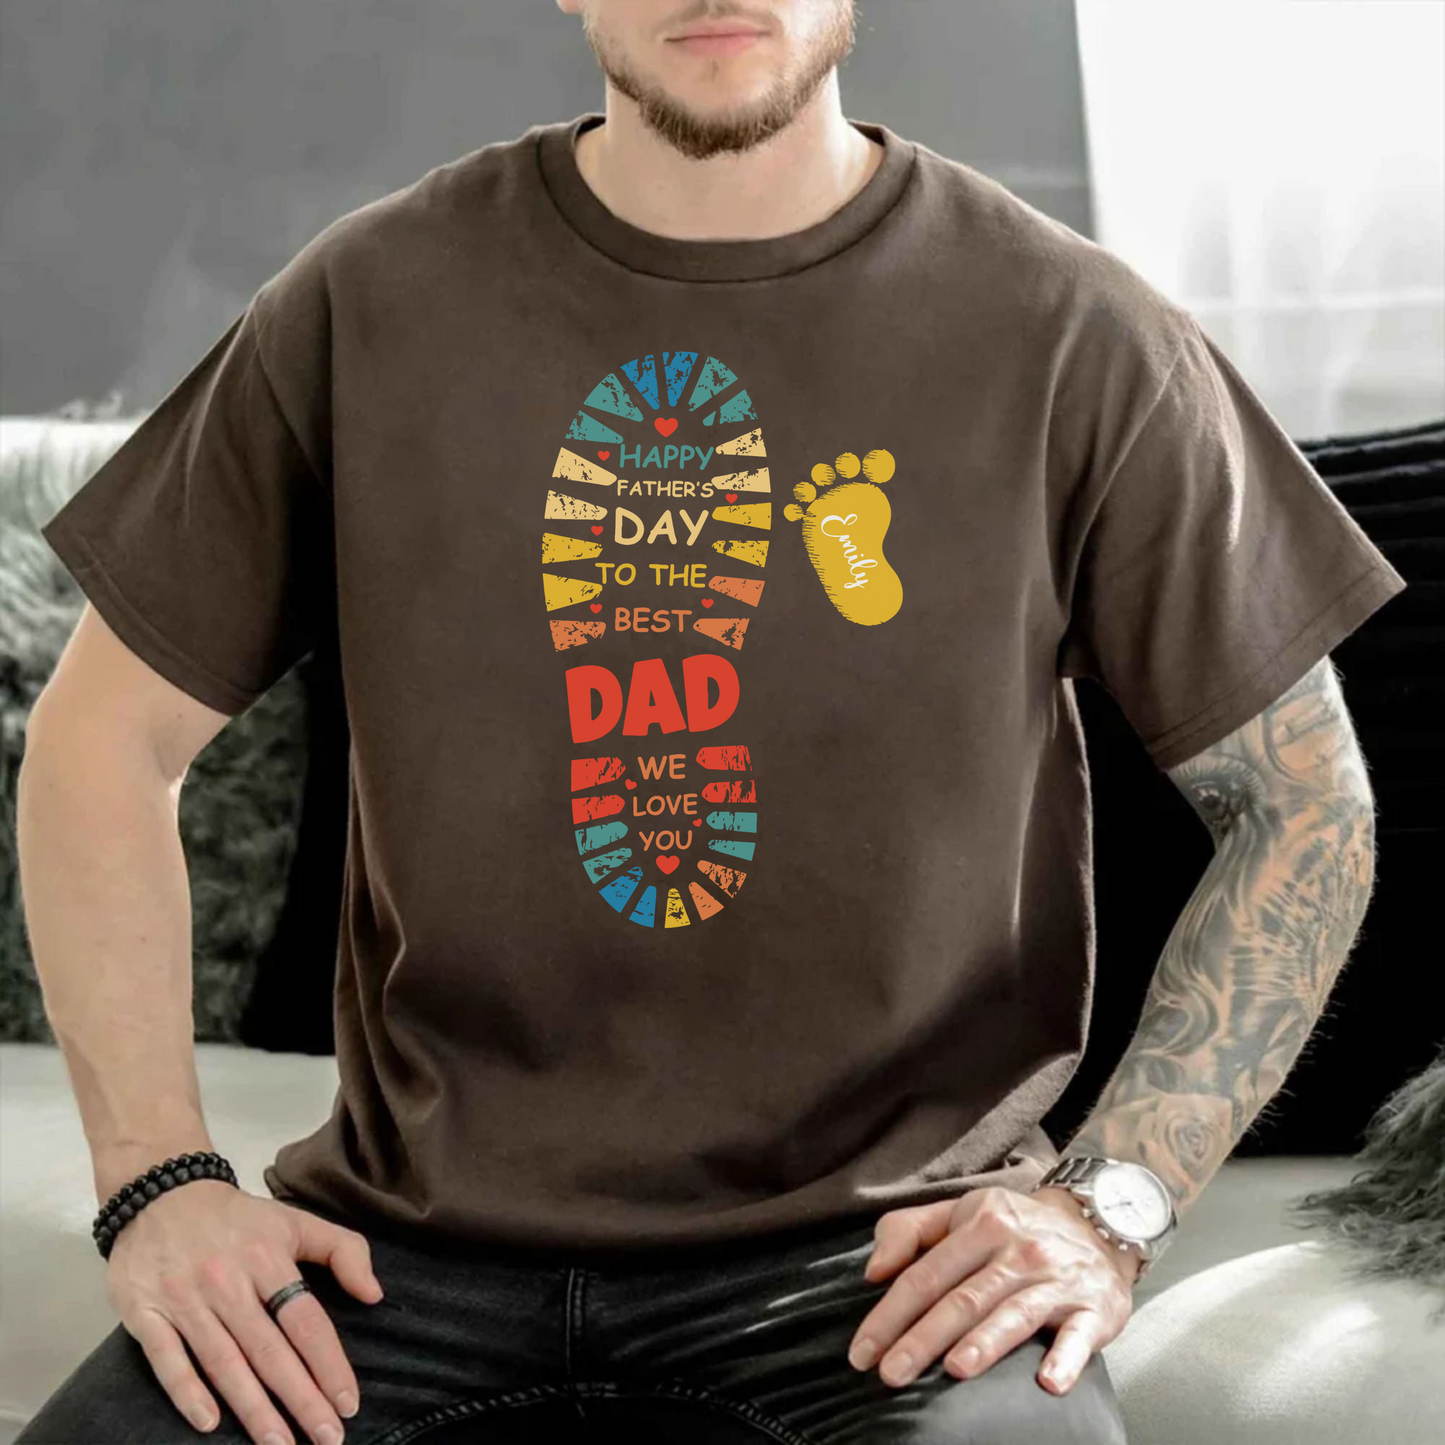 Best Dad - Personalized Father's Day Gift with Kids' Names